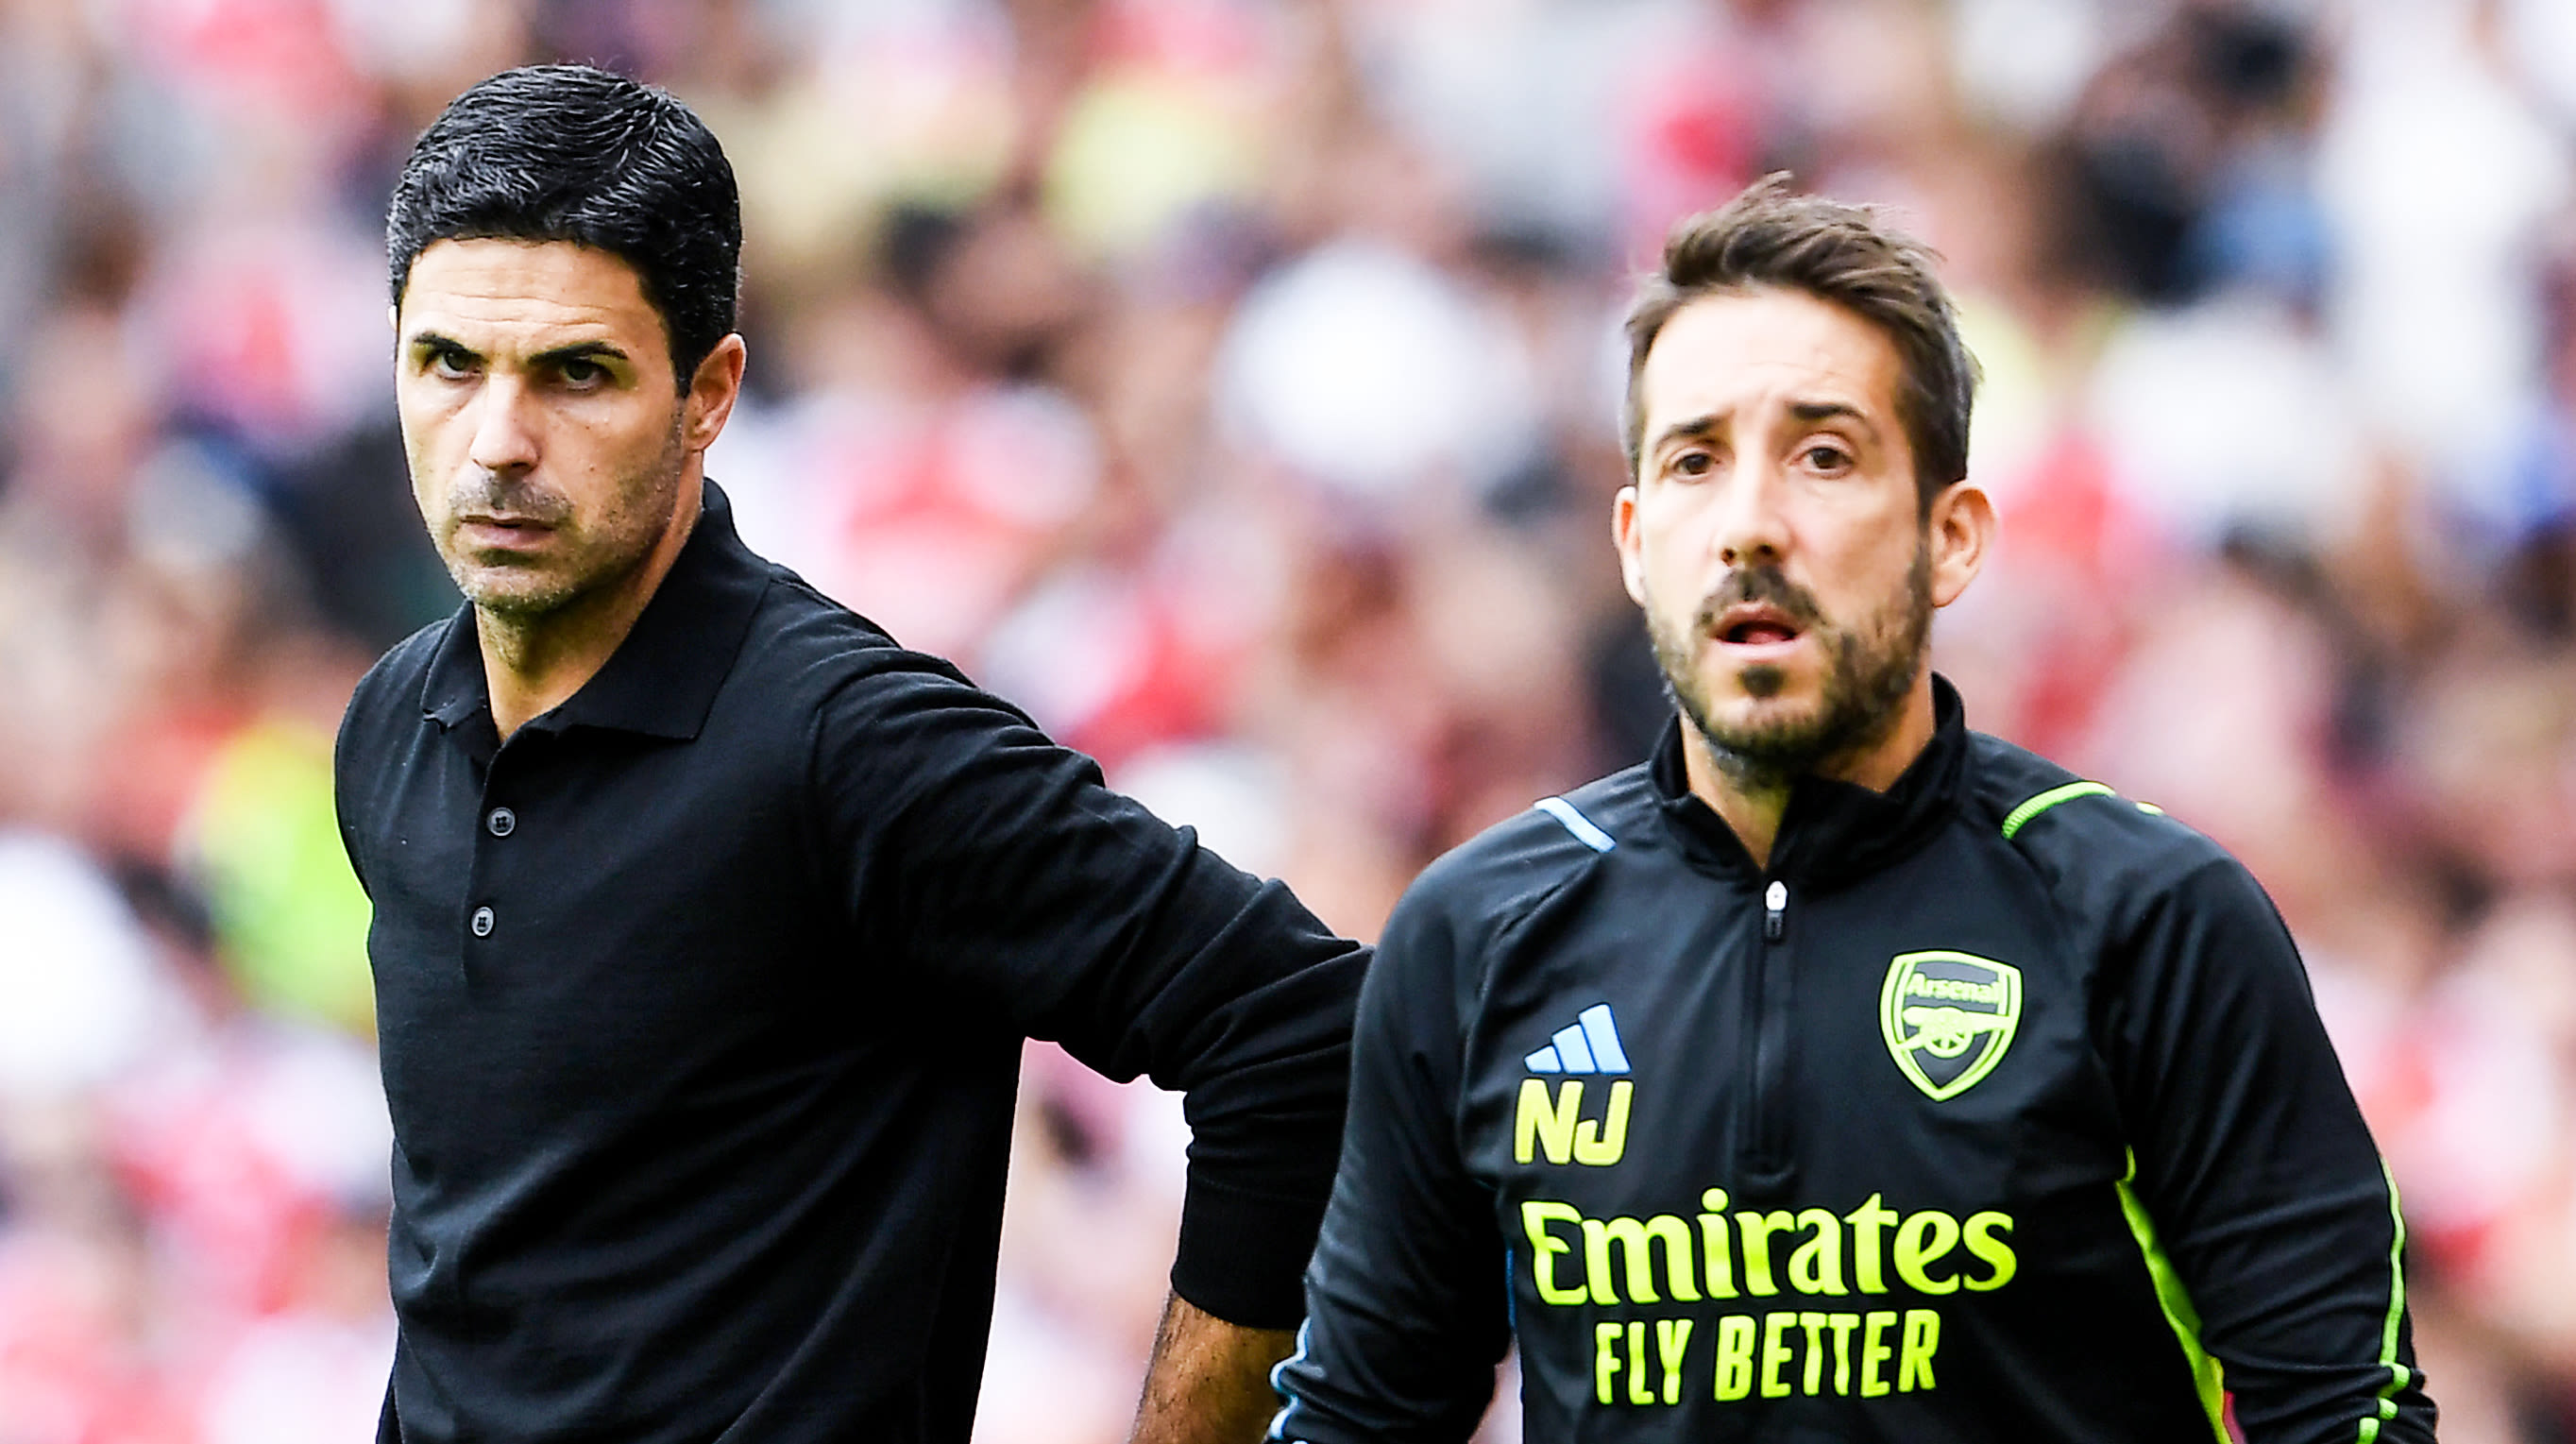 Nicolas Jover: Who is Arsenal-set piece coach and what impact has he made?